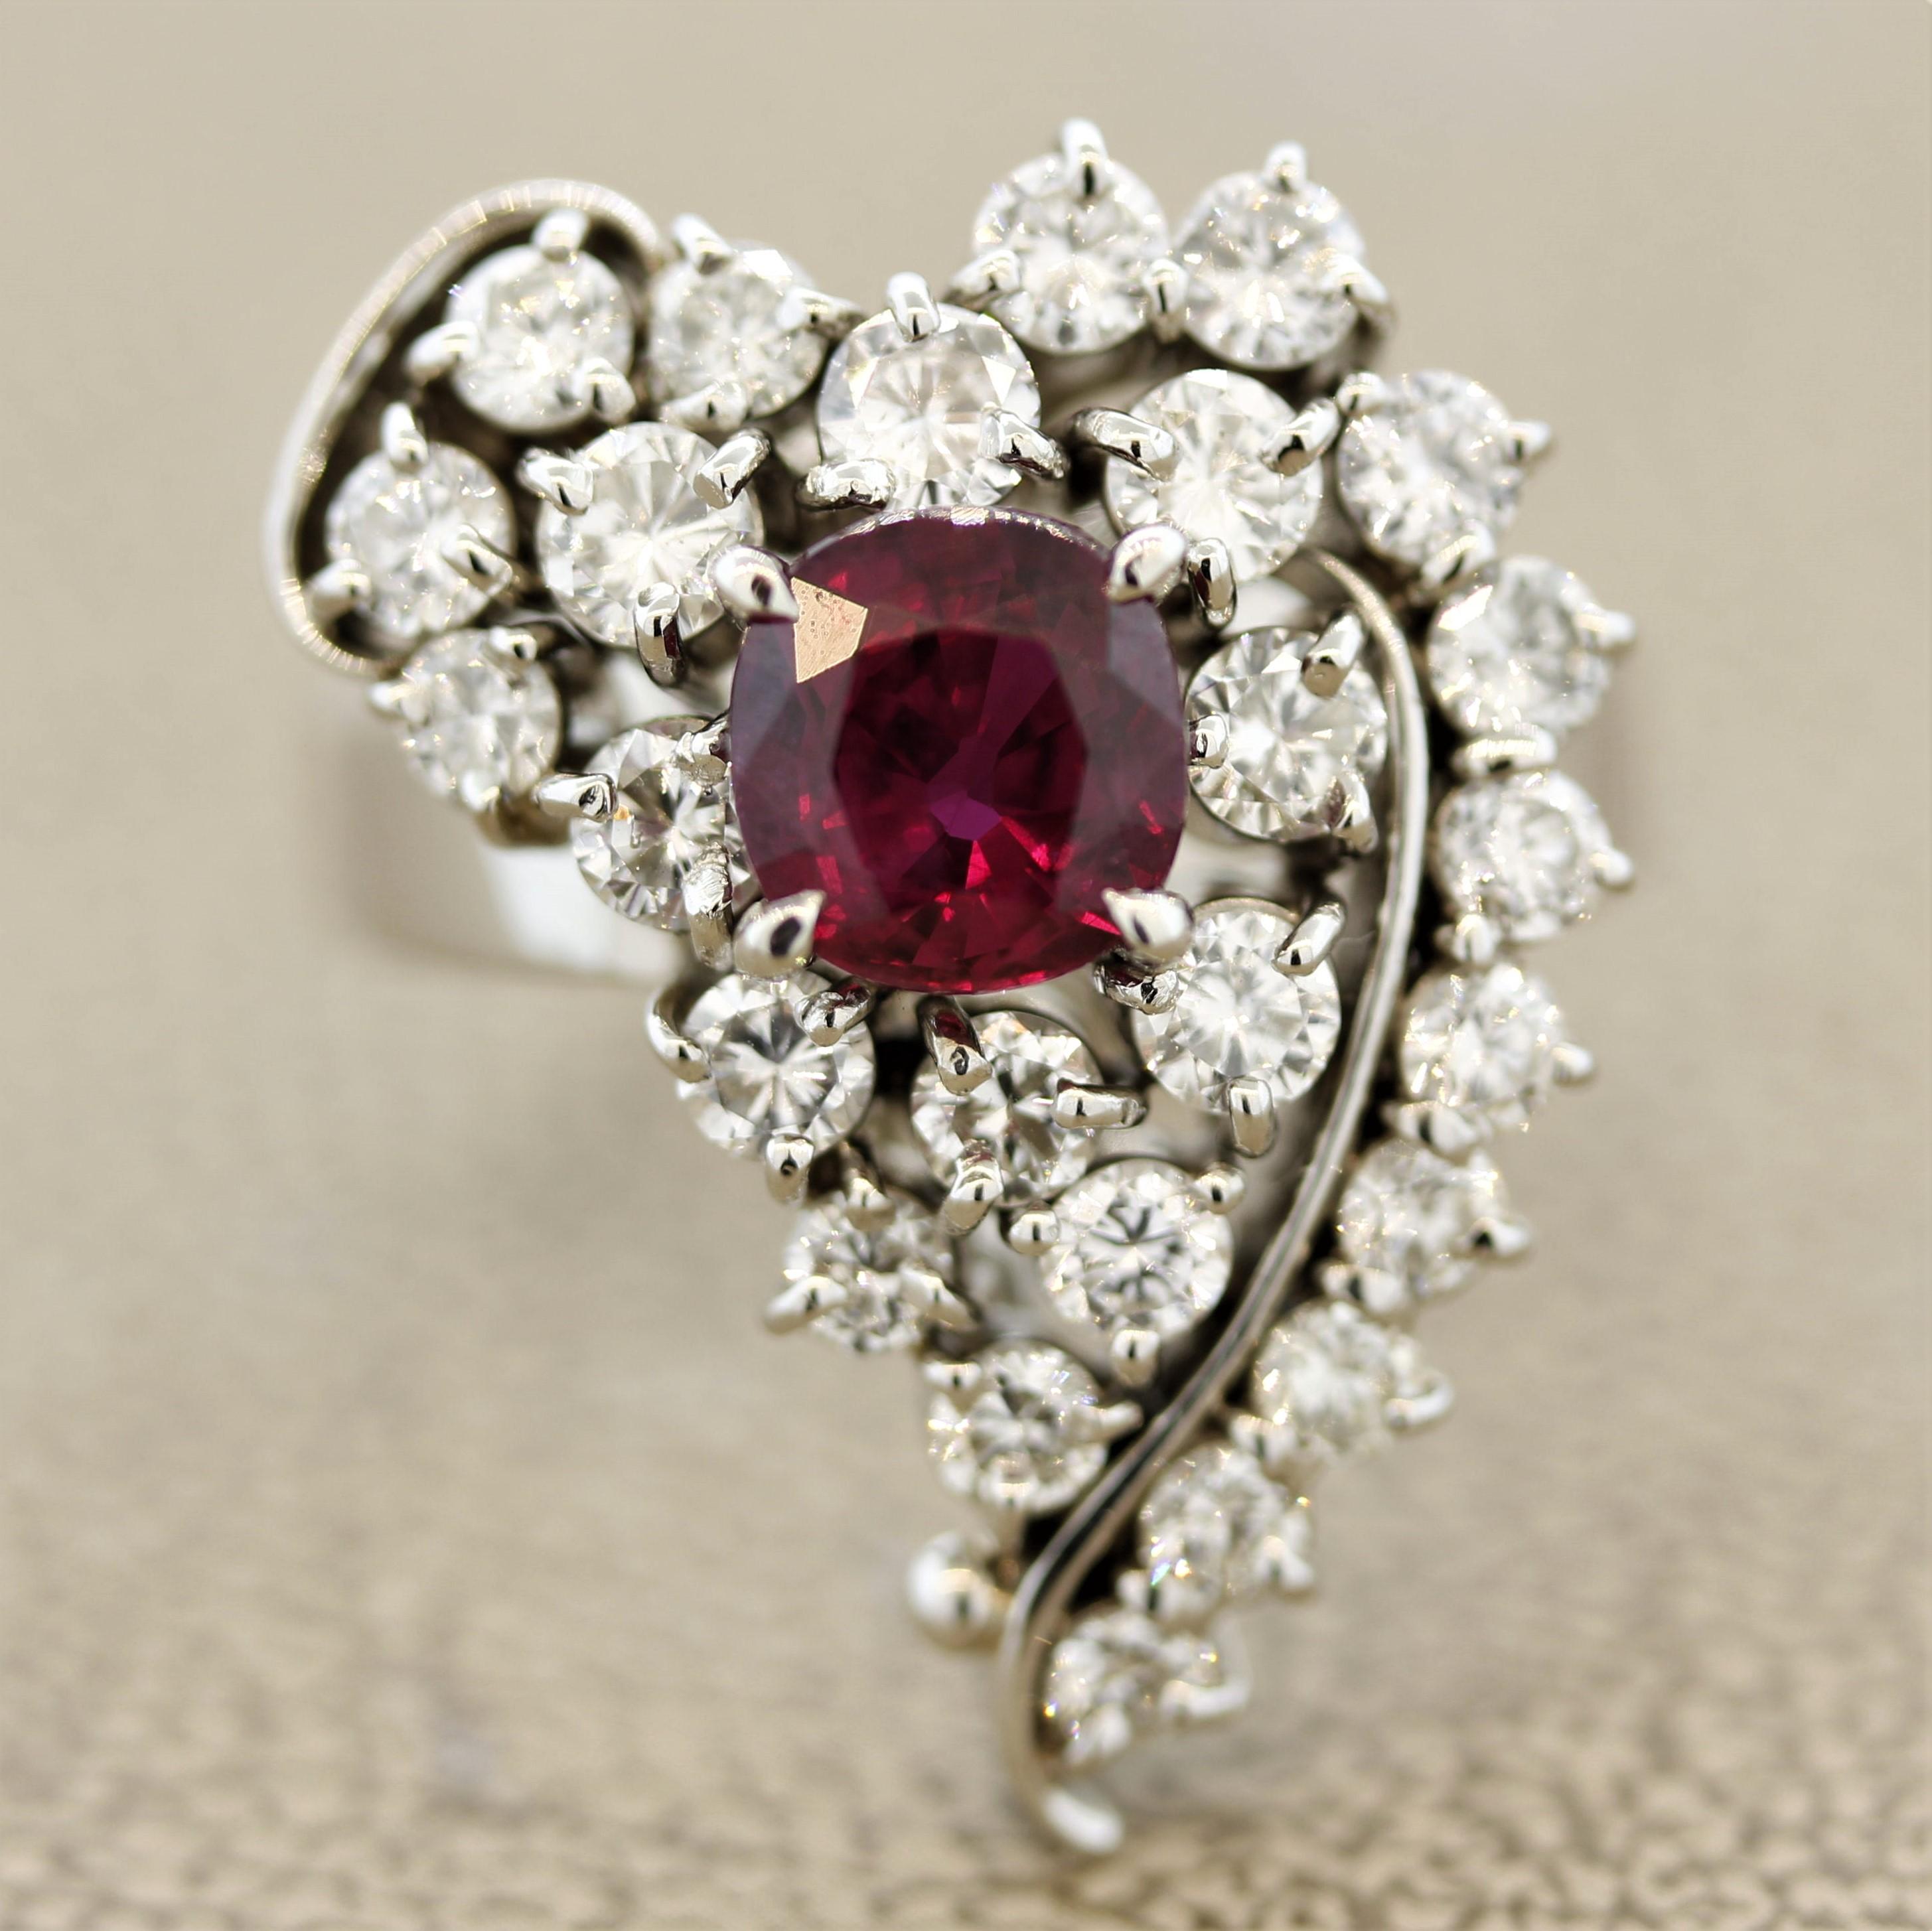 A stylish ring resembling a heart featuring fine quality gems. The cushion shaped ruby weighs 1.66 carats and has a pure vivid red color. A true gem of a ruby. It is accented by 1.73 carats of round brilliant cut diamonds which are set inside the